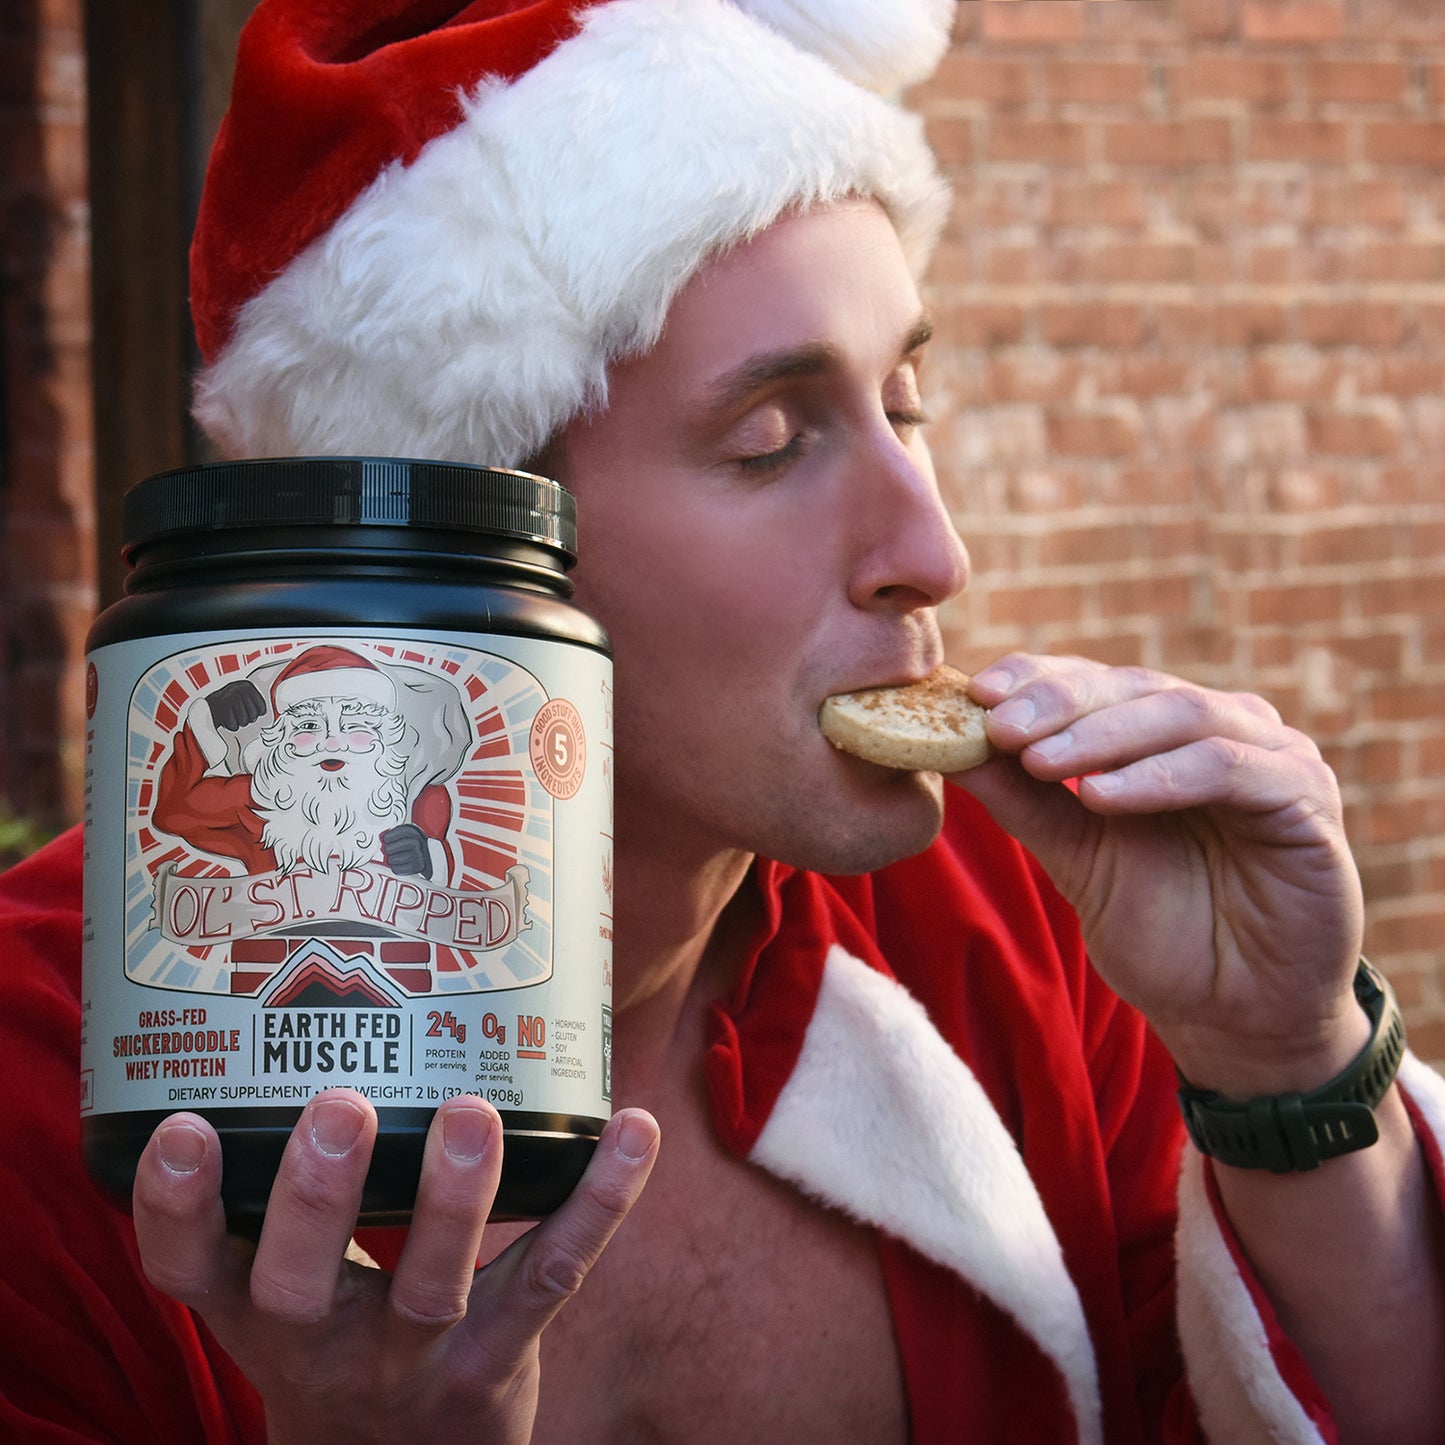 SEASONAL FLAVOR: Ol’ St. Ripped Snickerdoodle Grass Fed Protein